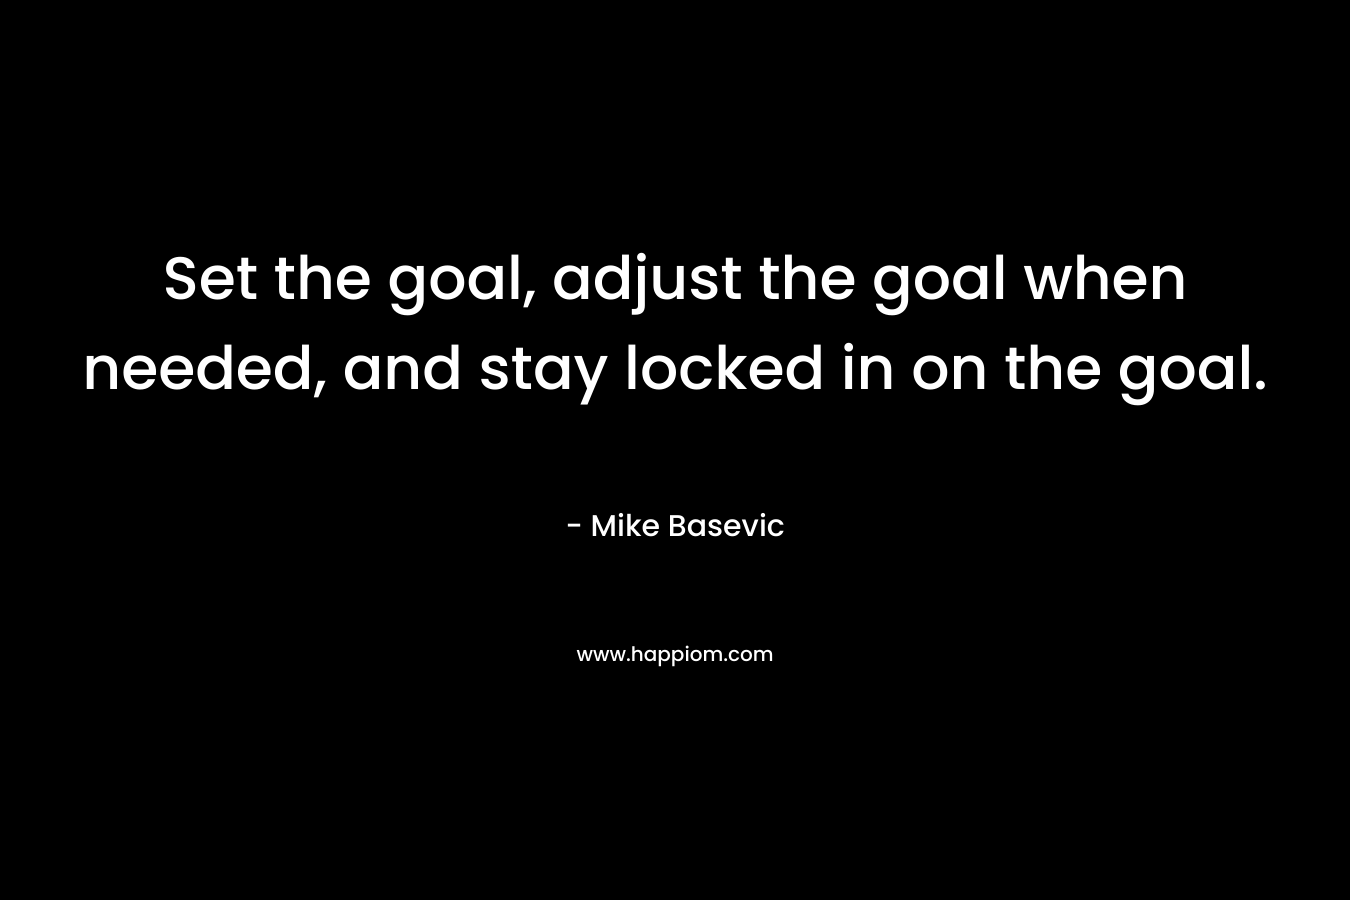 Set the goal, adjust the goal when needed, and stay locked in on the goal. – Mike Basevic